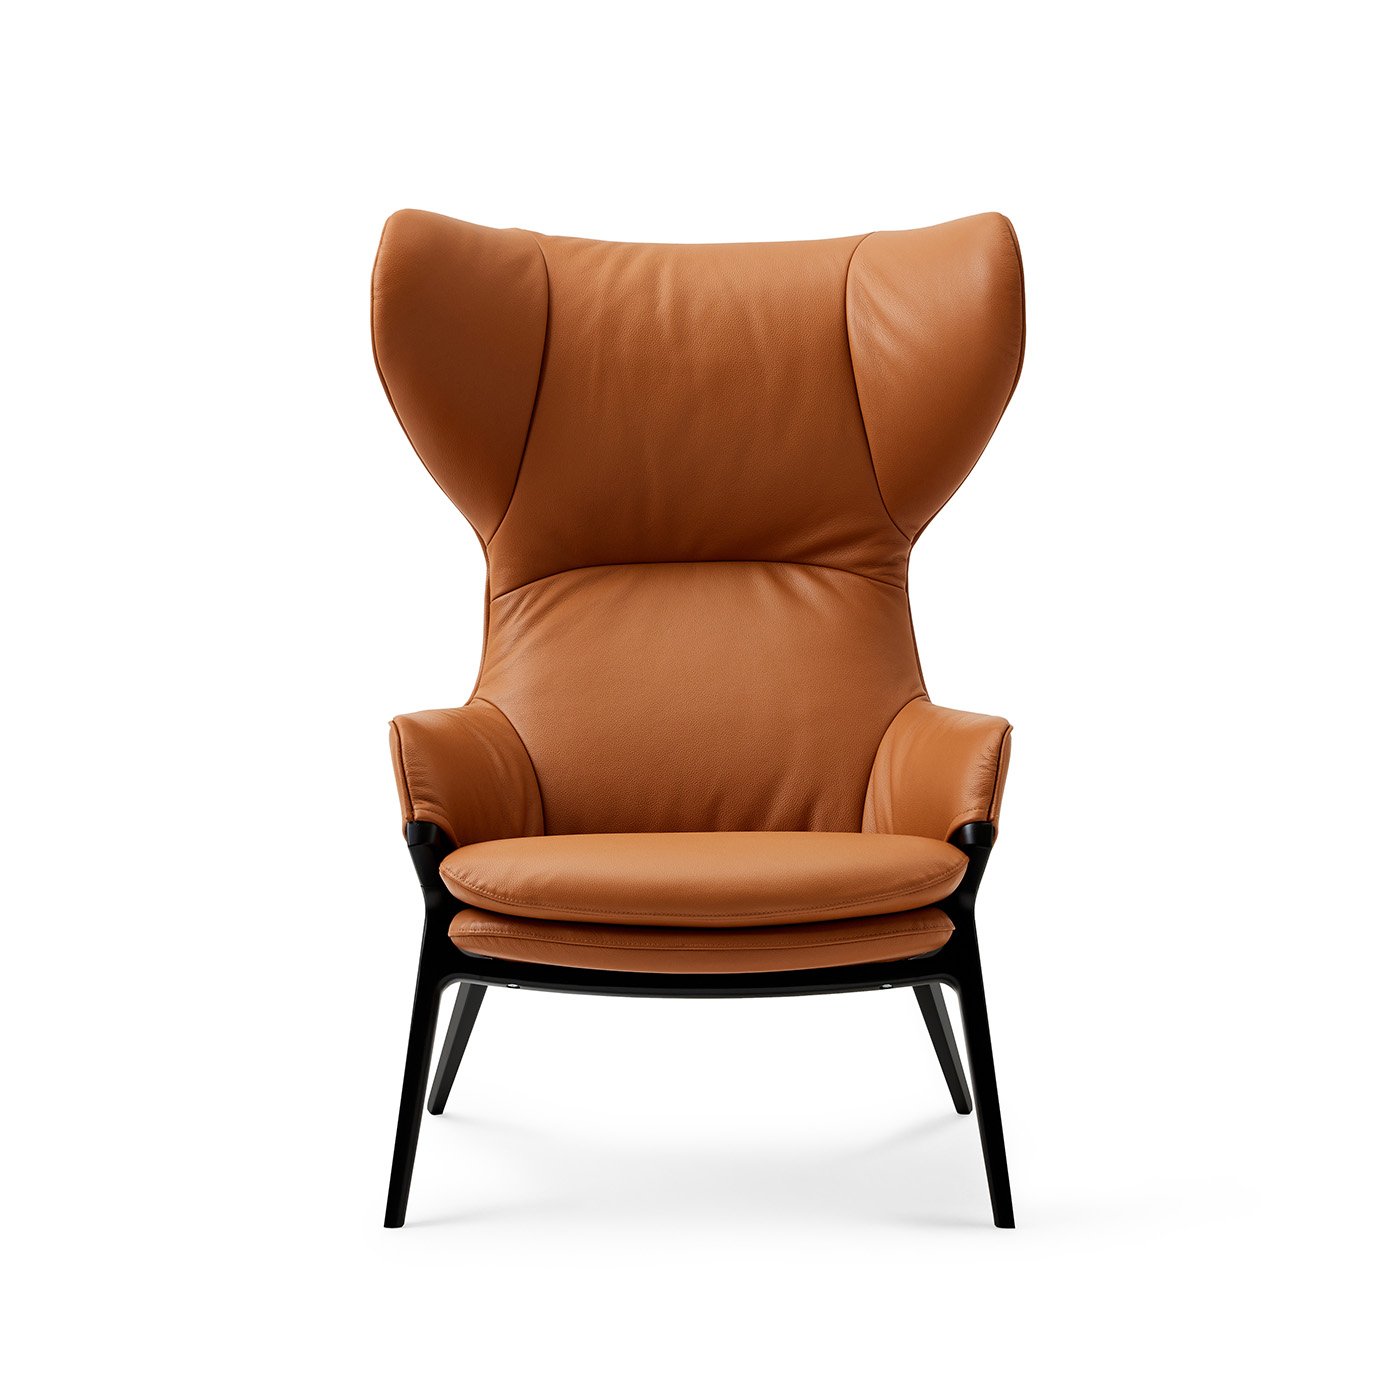 Detail front shot of the P22 lounge chair in Ambra